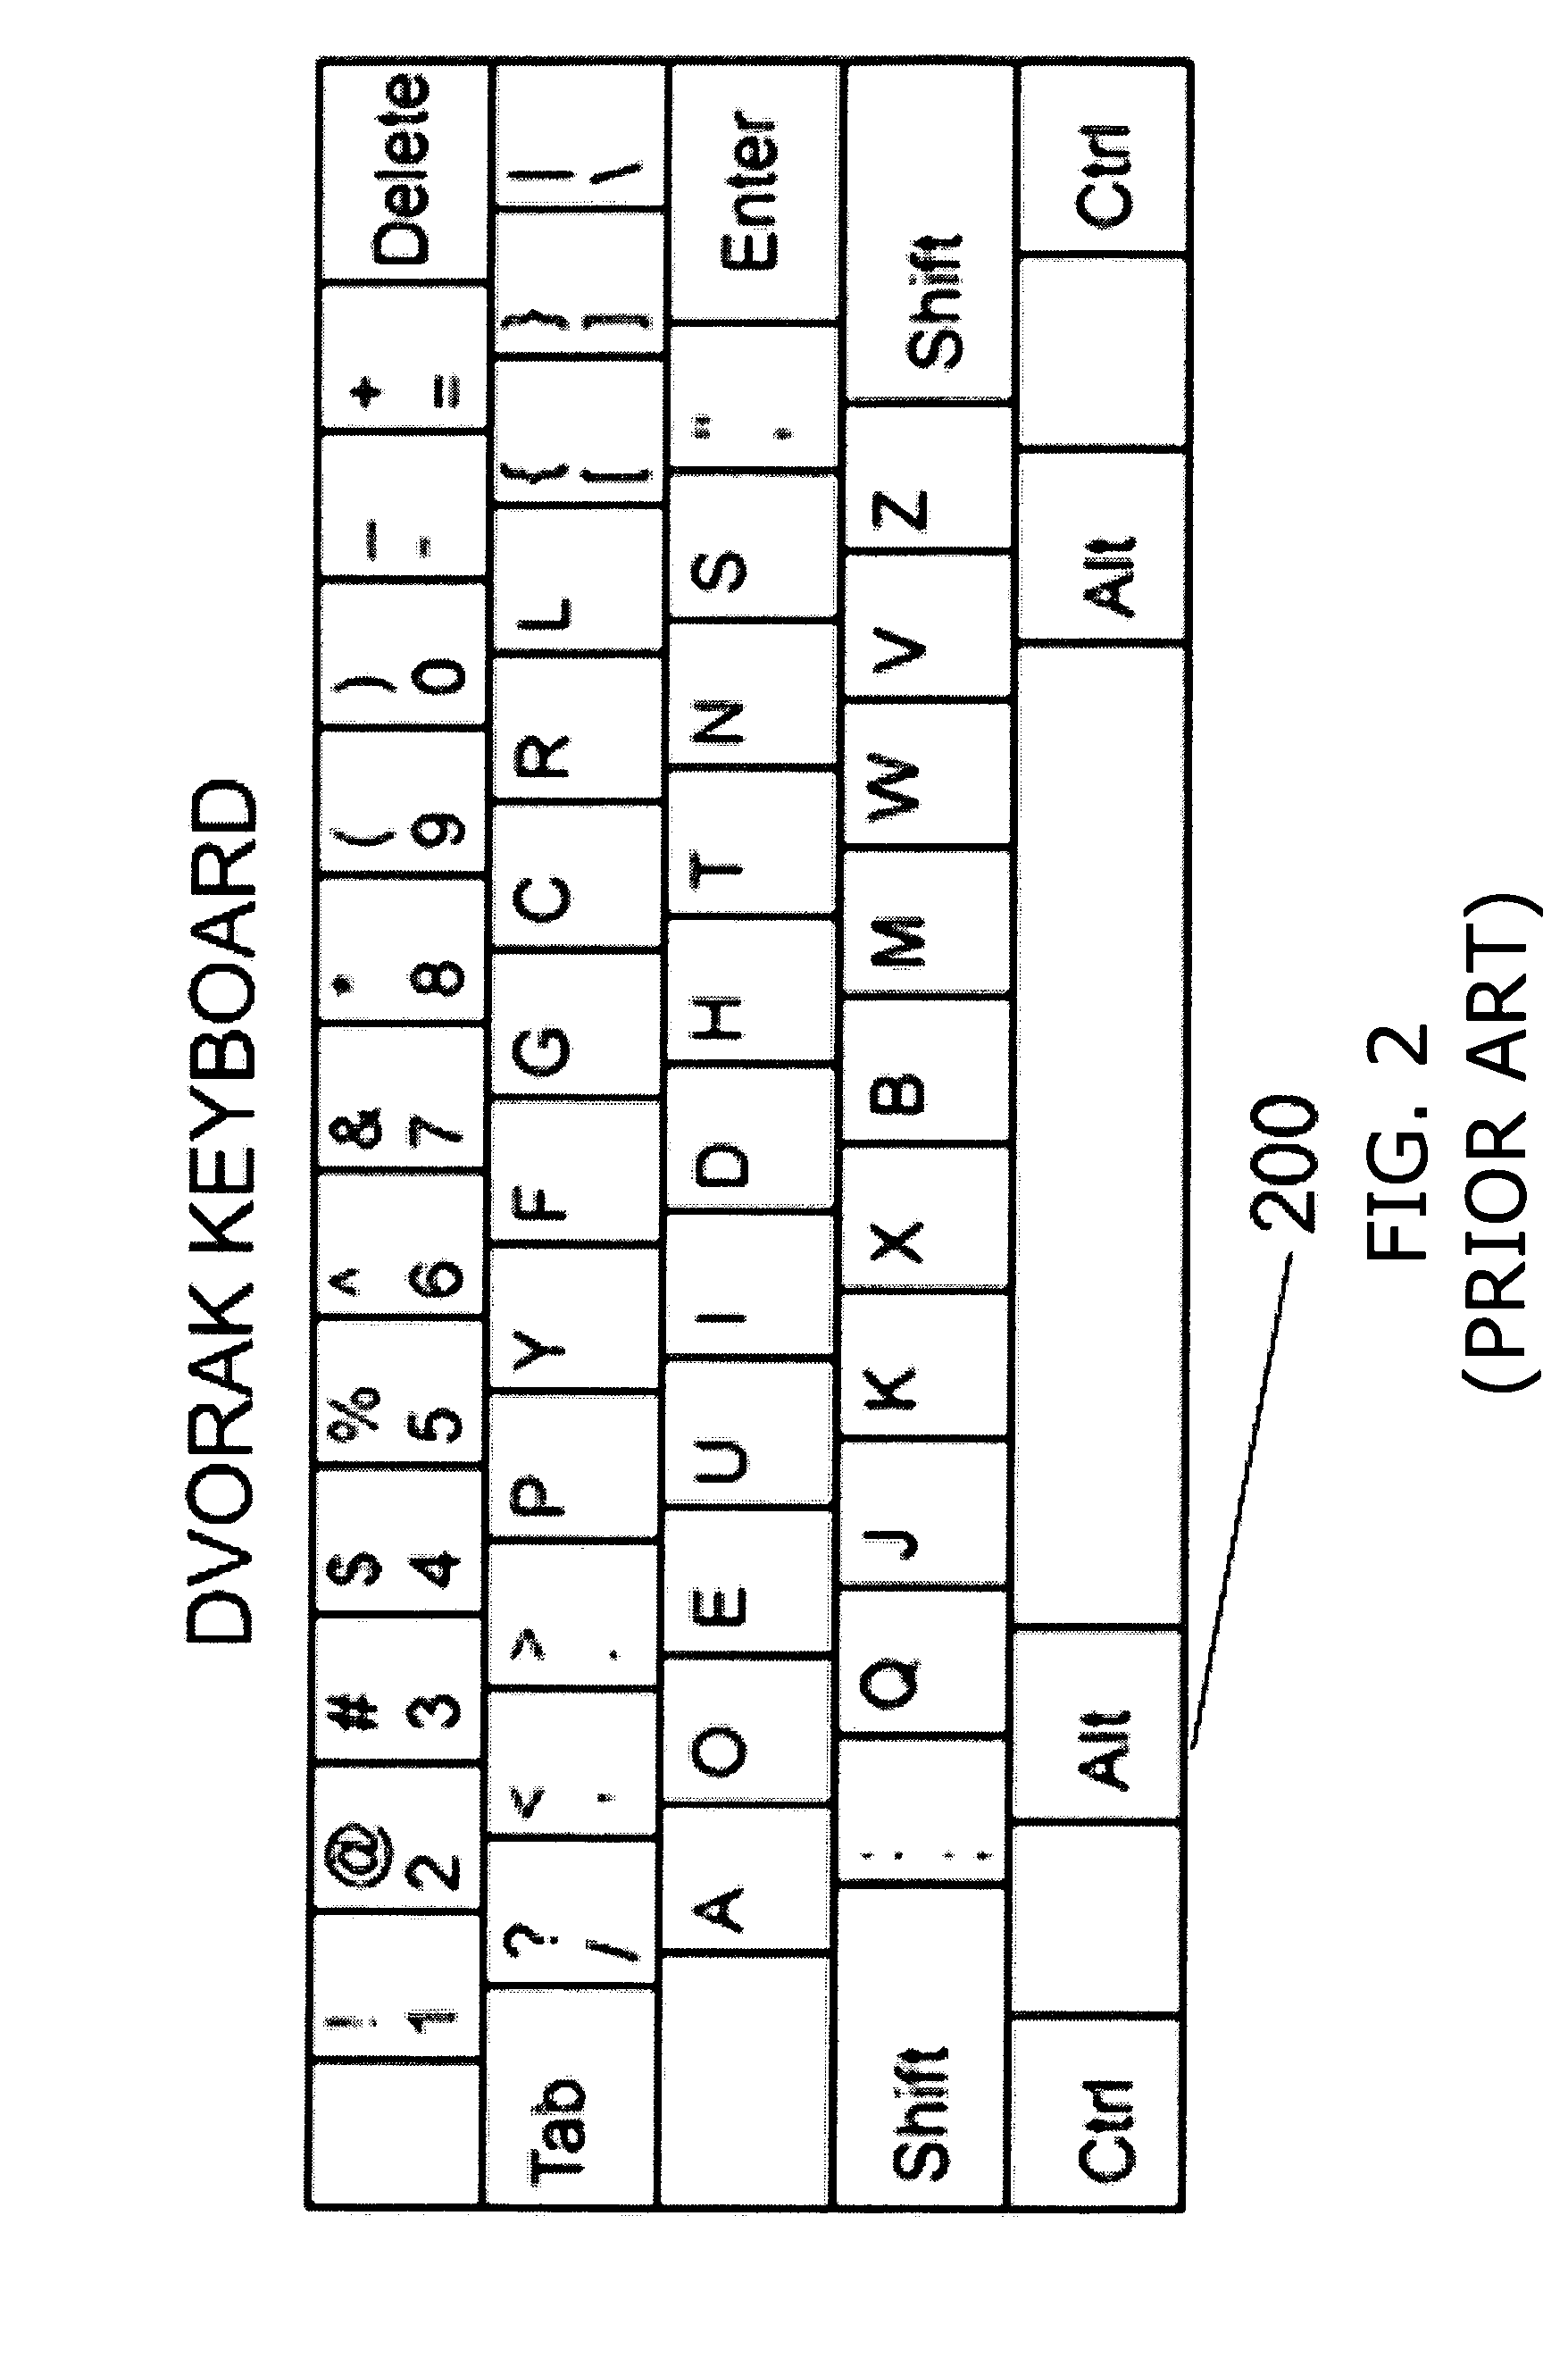 Uniquely identifiable keys for electronic keyboards